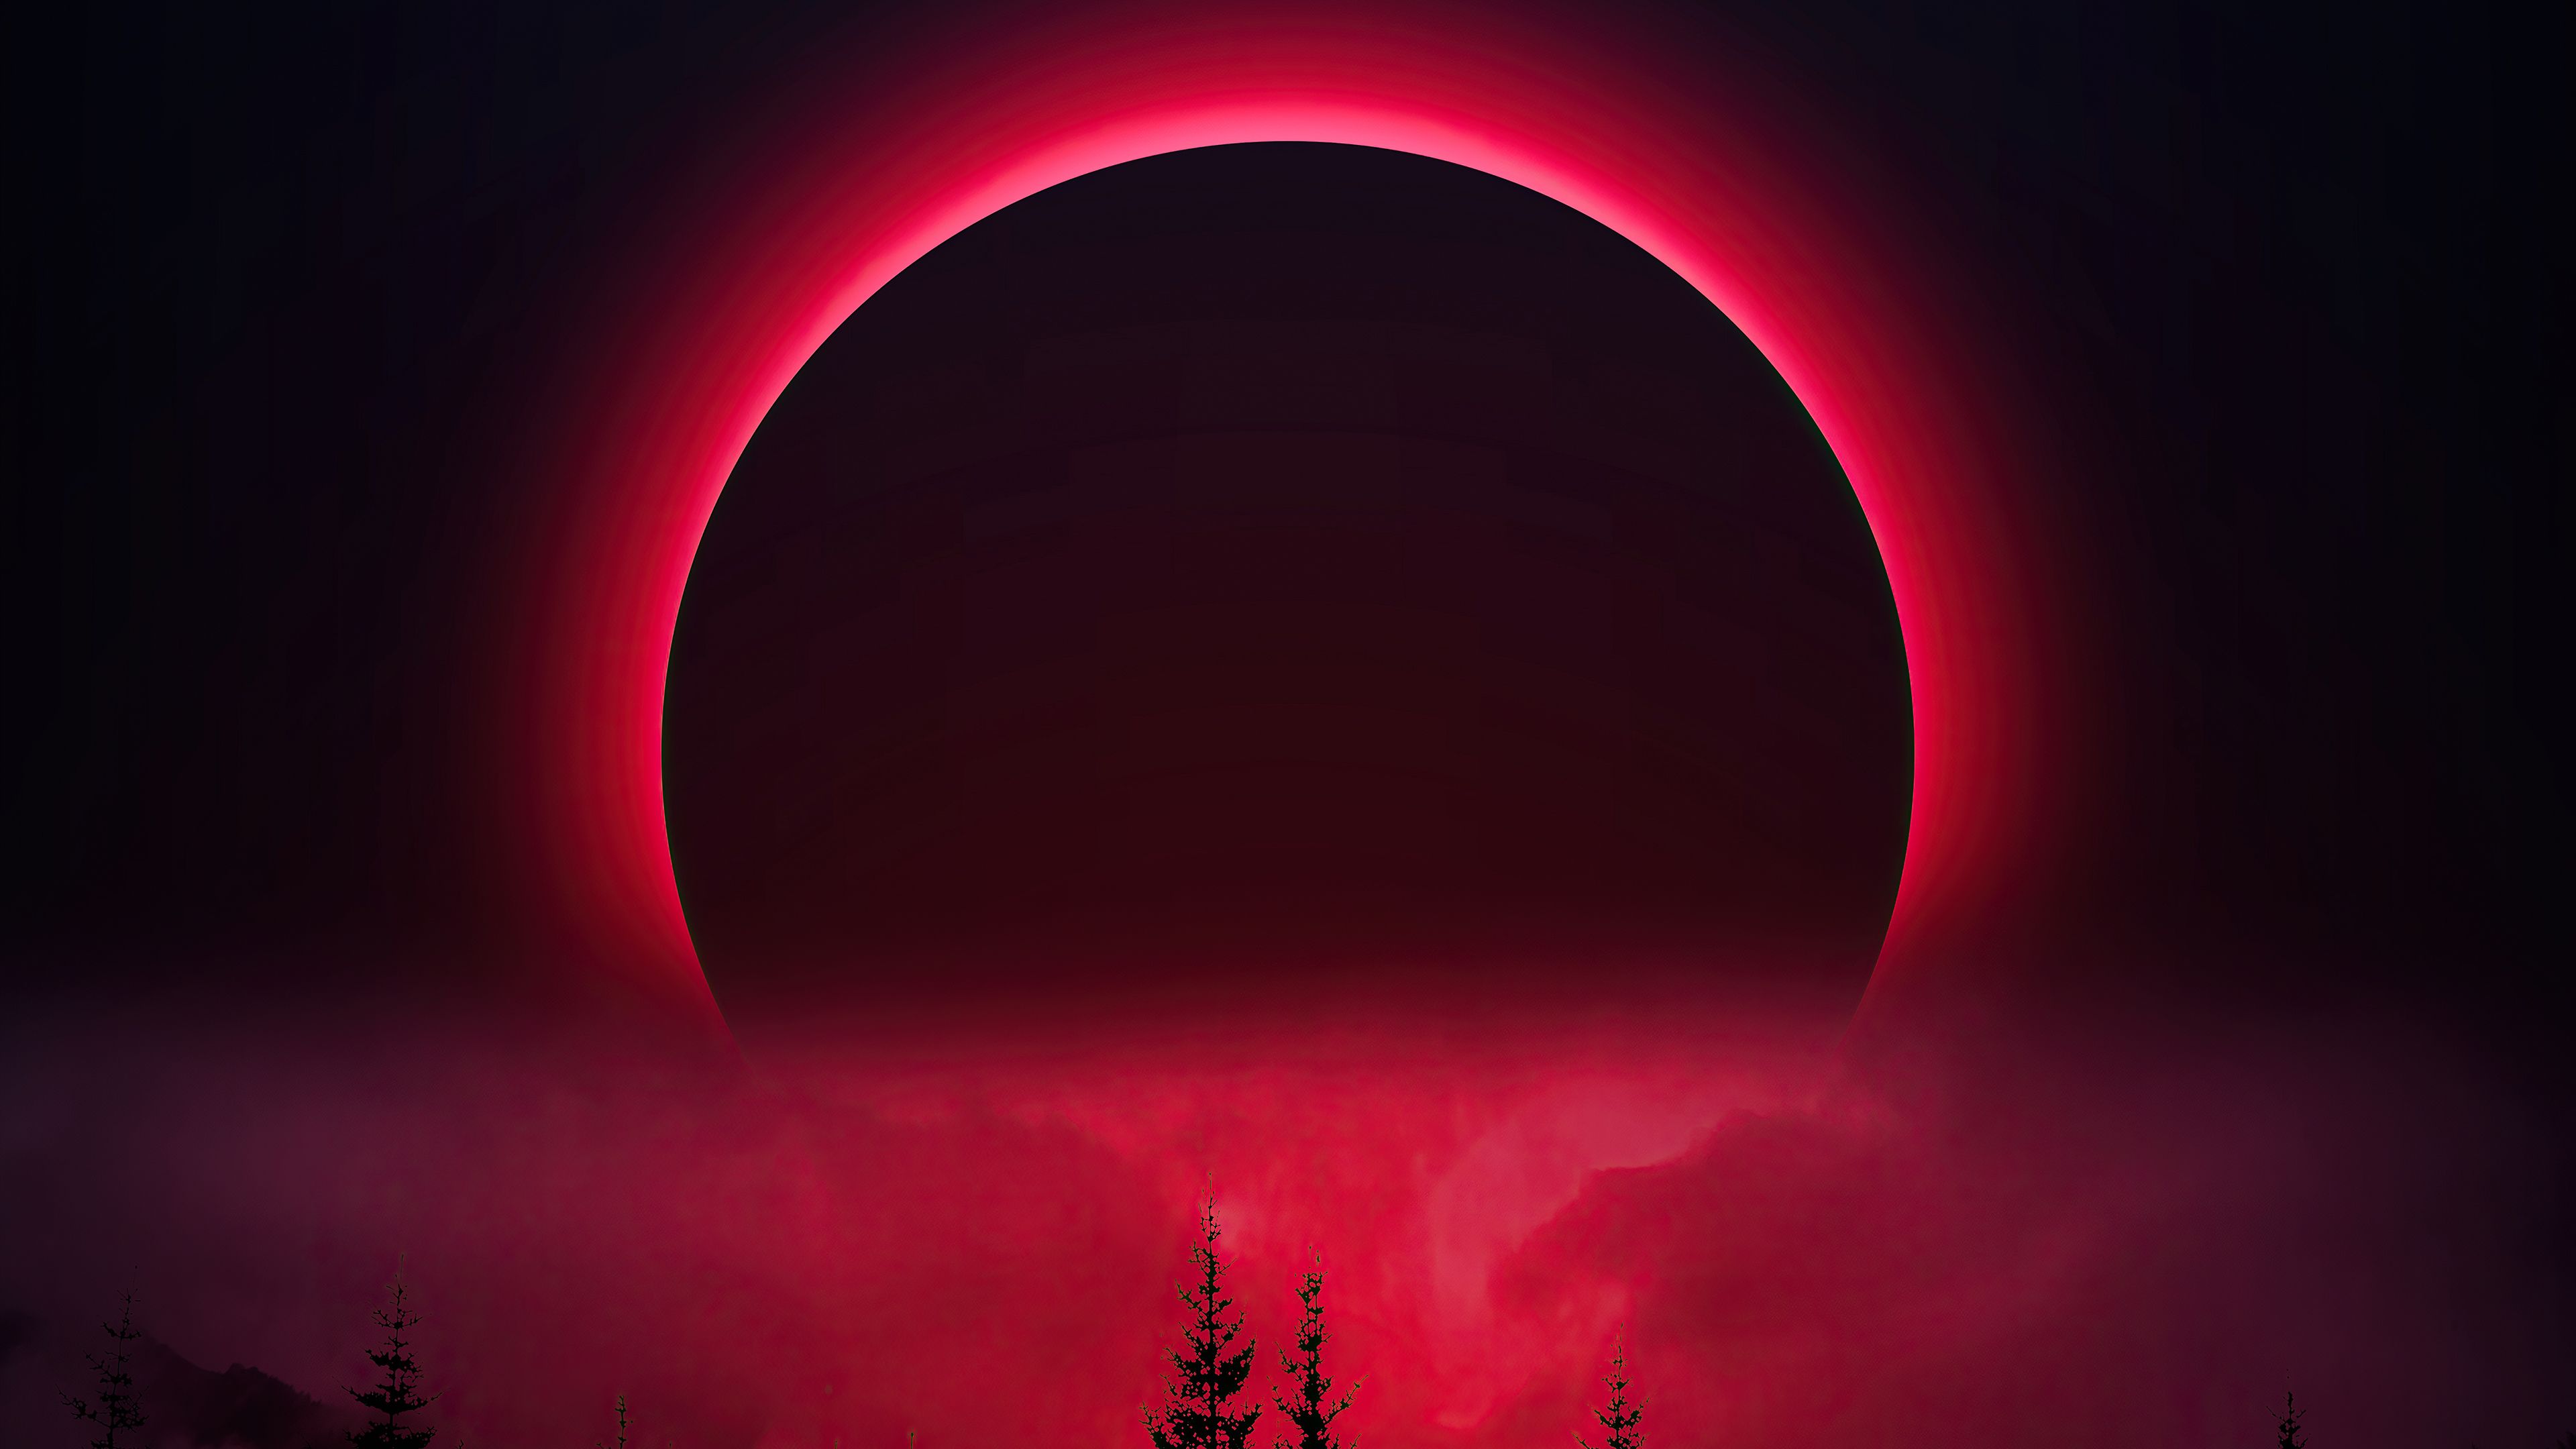 Cool Red Moon Wallpapers - Wallpaper Cave